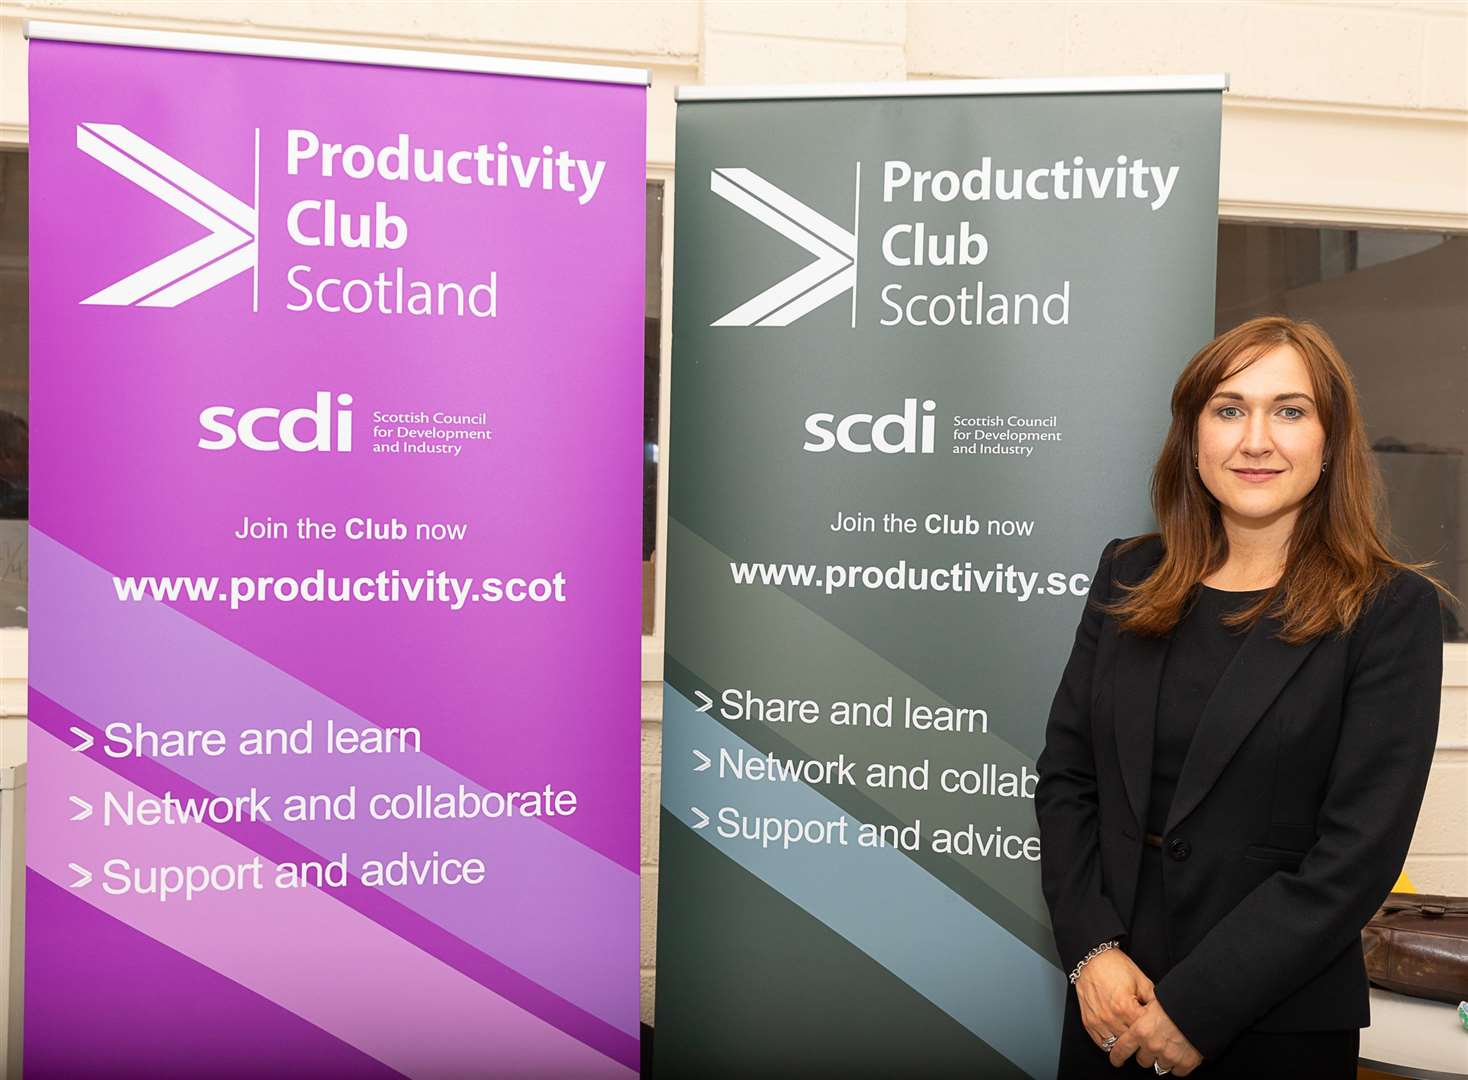 Ashleigh McCulloch, programme manager for Productivity Club Scotland.